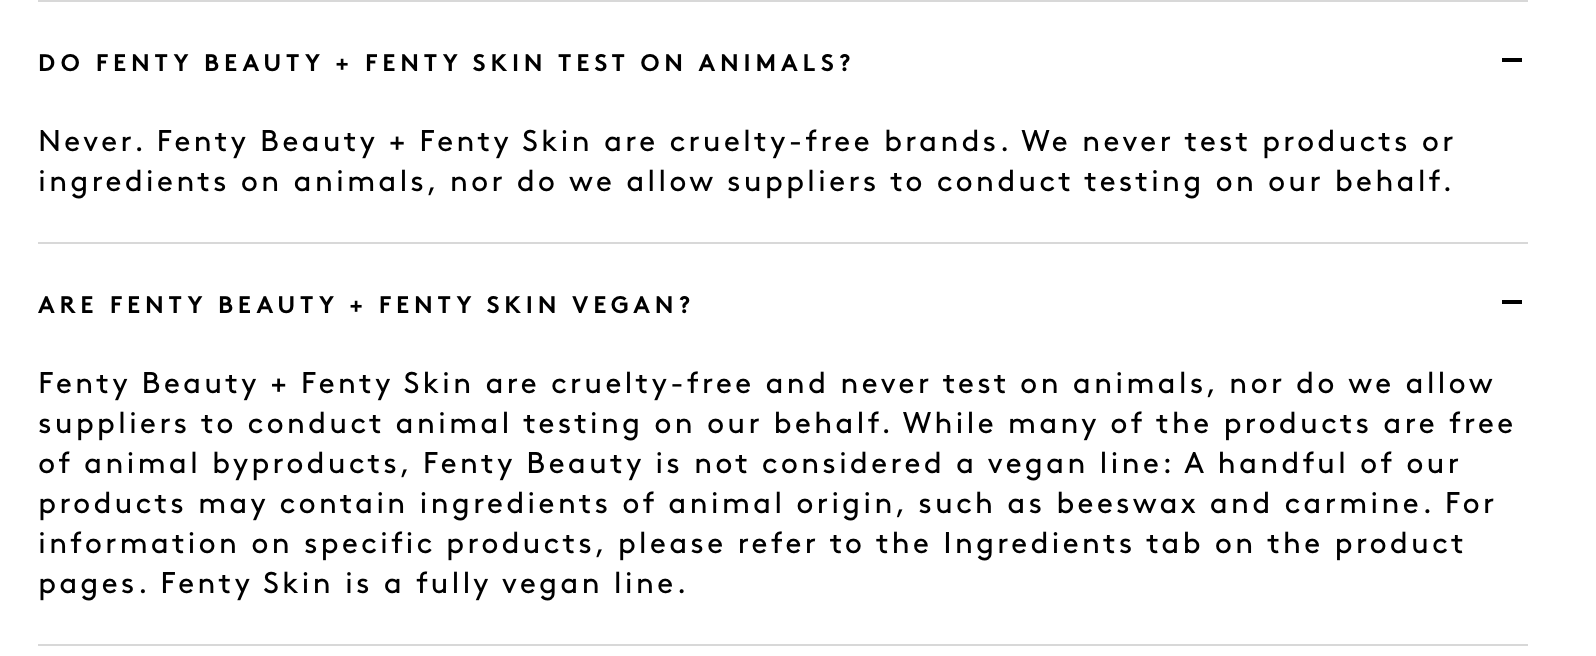 Does Fenty Beauty Test on Animals?